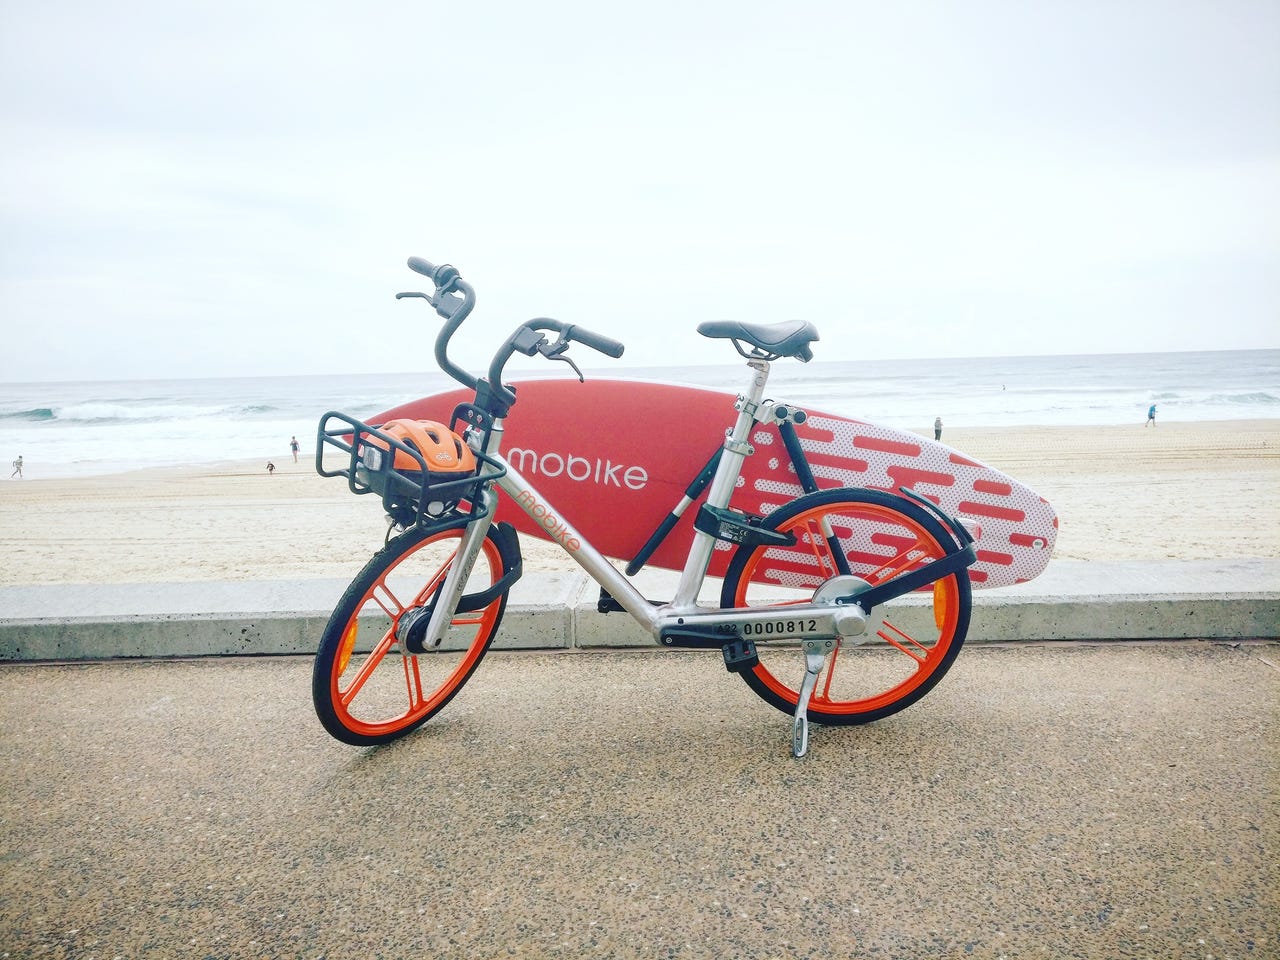 mobike-gold-coast-launch-low-res.jpg